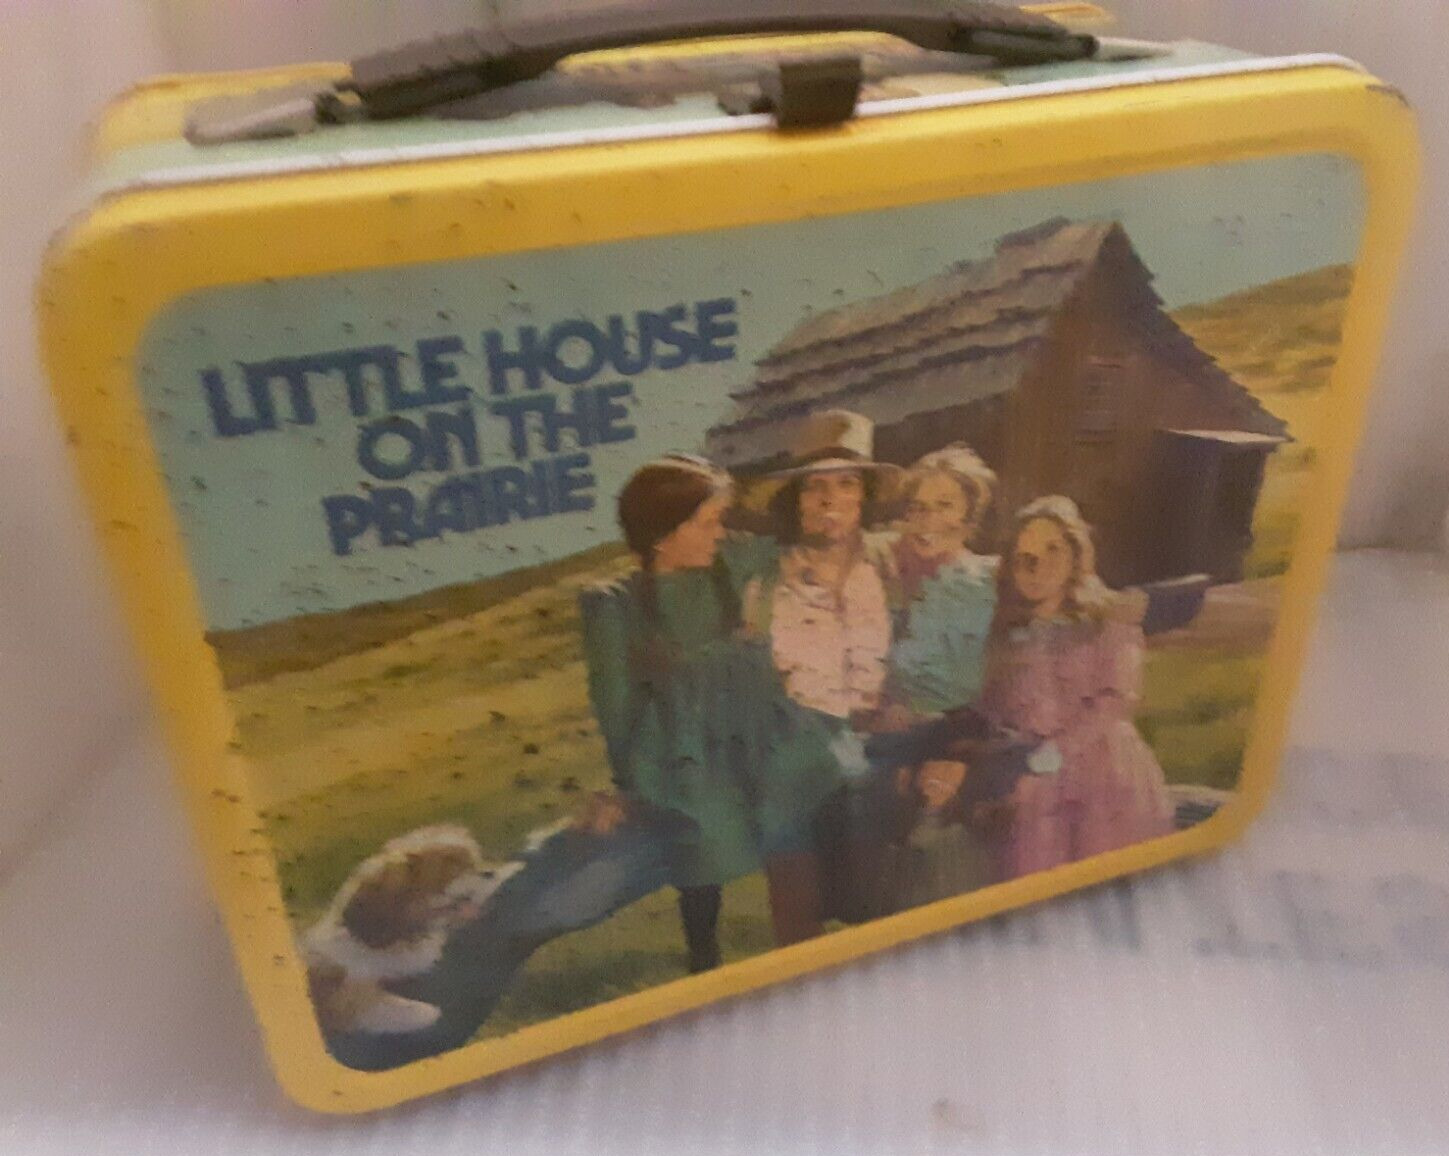 RARE 1978 Little House On Prairie Metal Lunch Box By Thermos Brand Nice Lunchbox